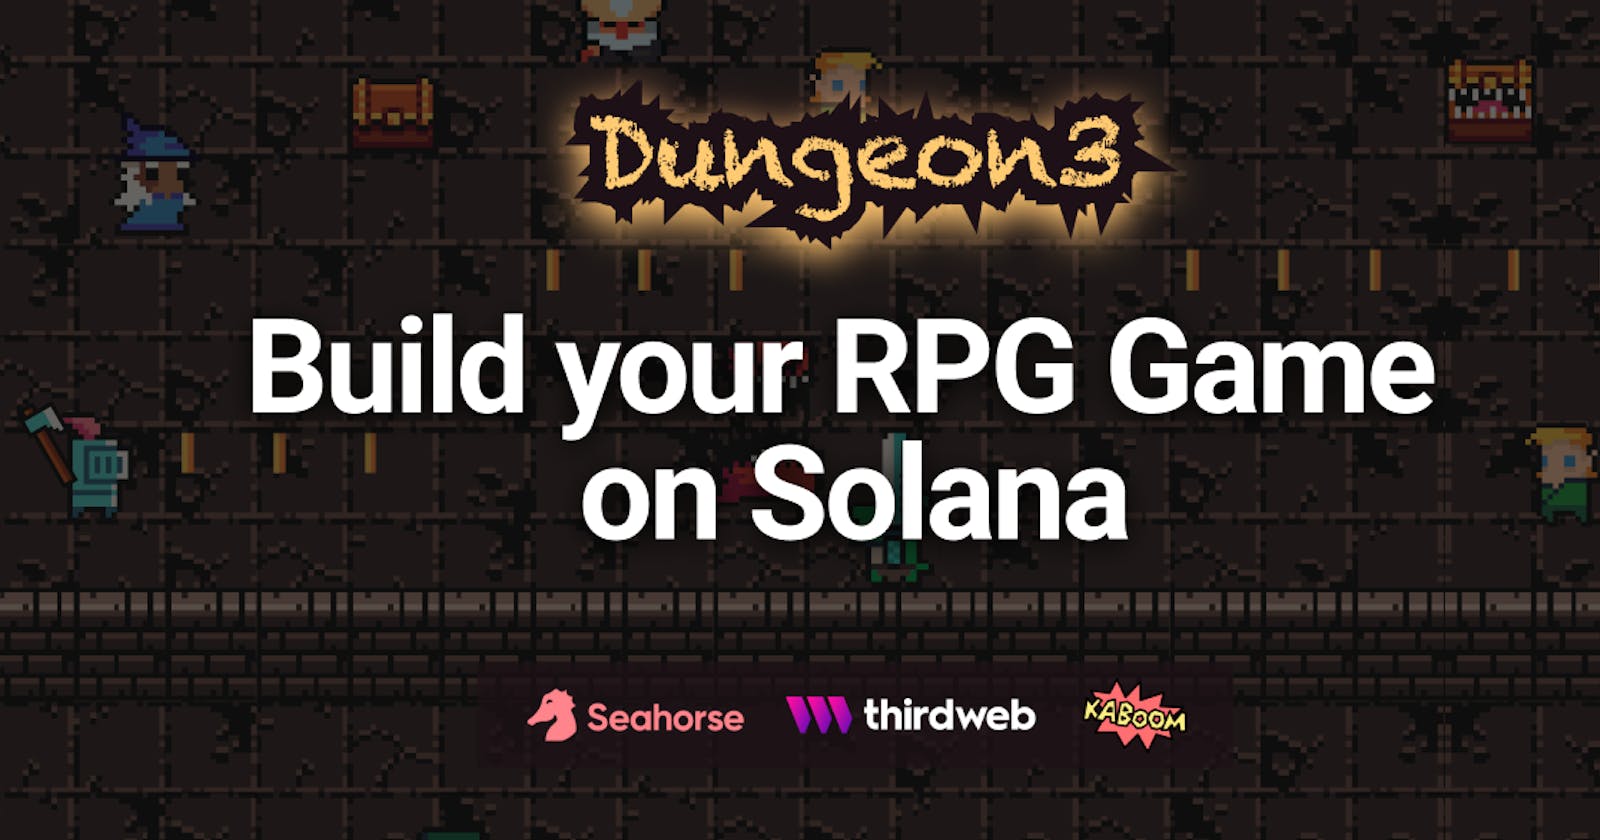 Build an RPG game on Solana